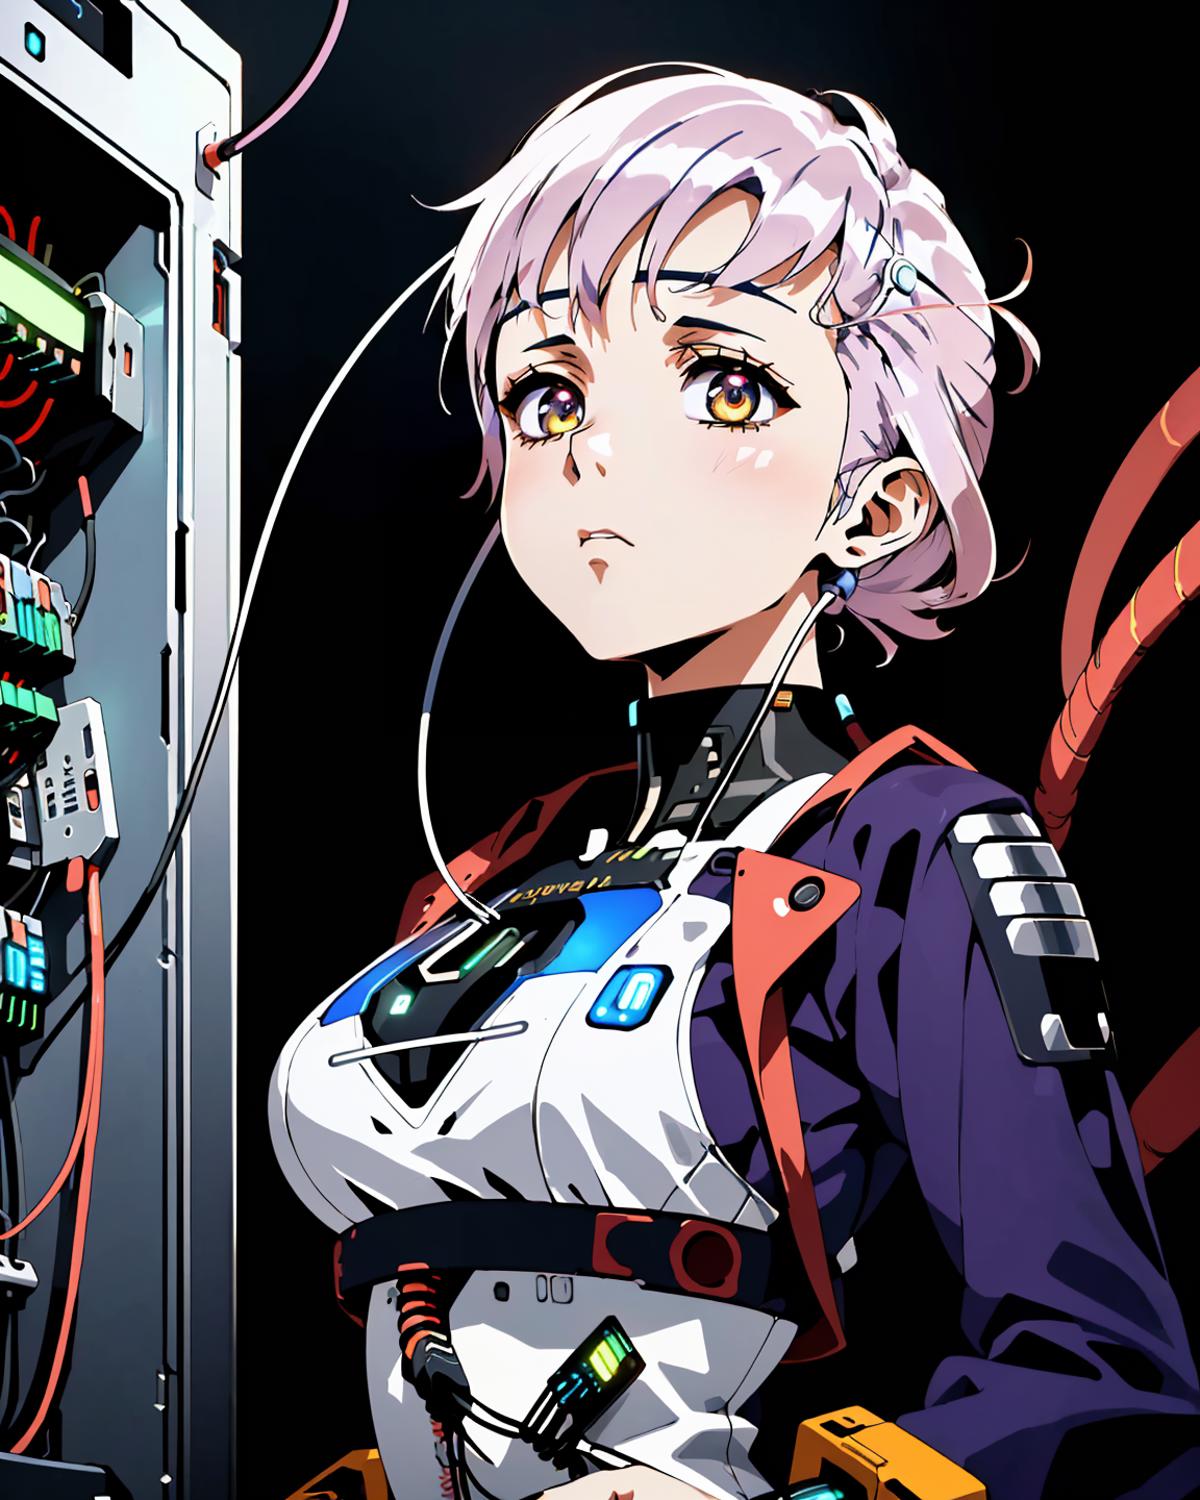 Anime Character with Purple Hair and Circuit Board Strap.